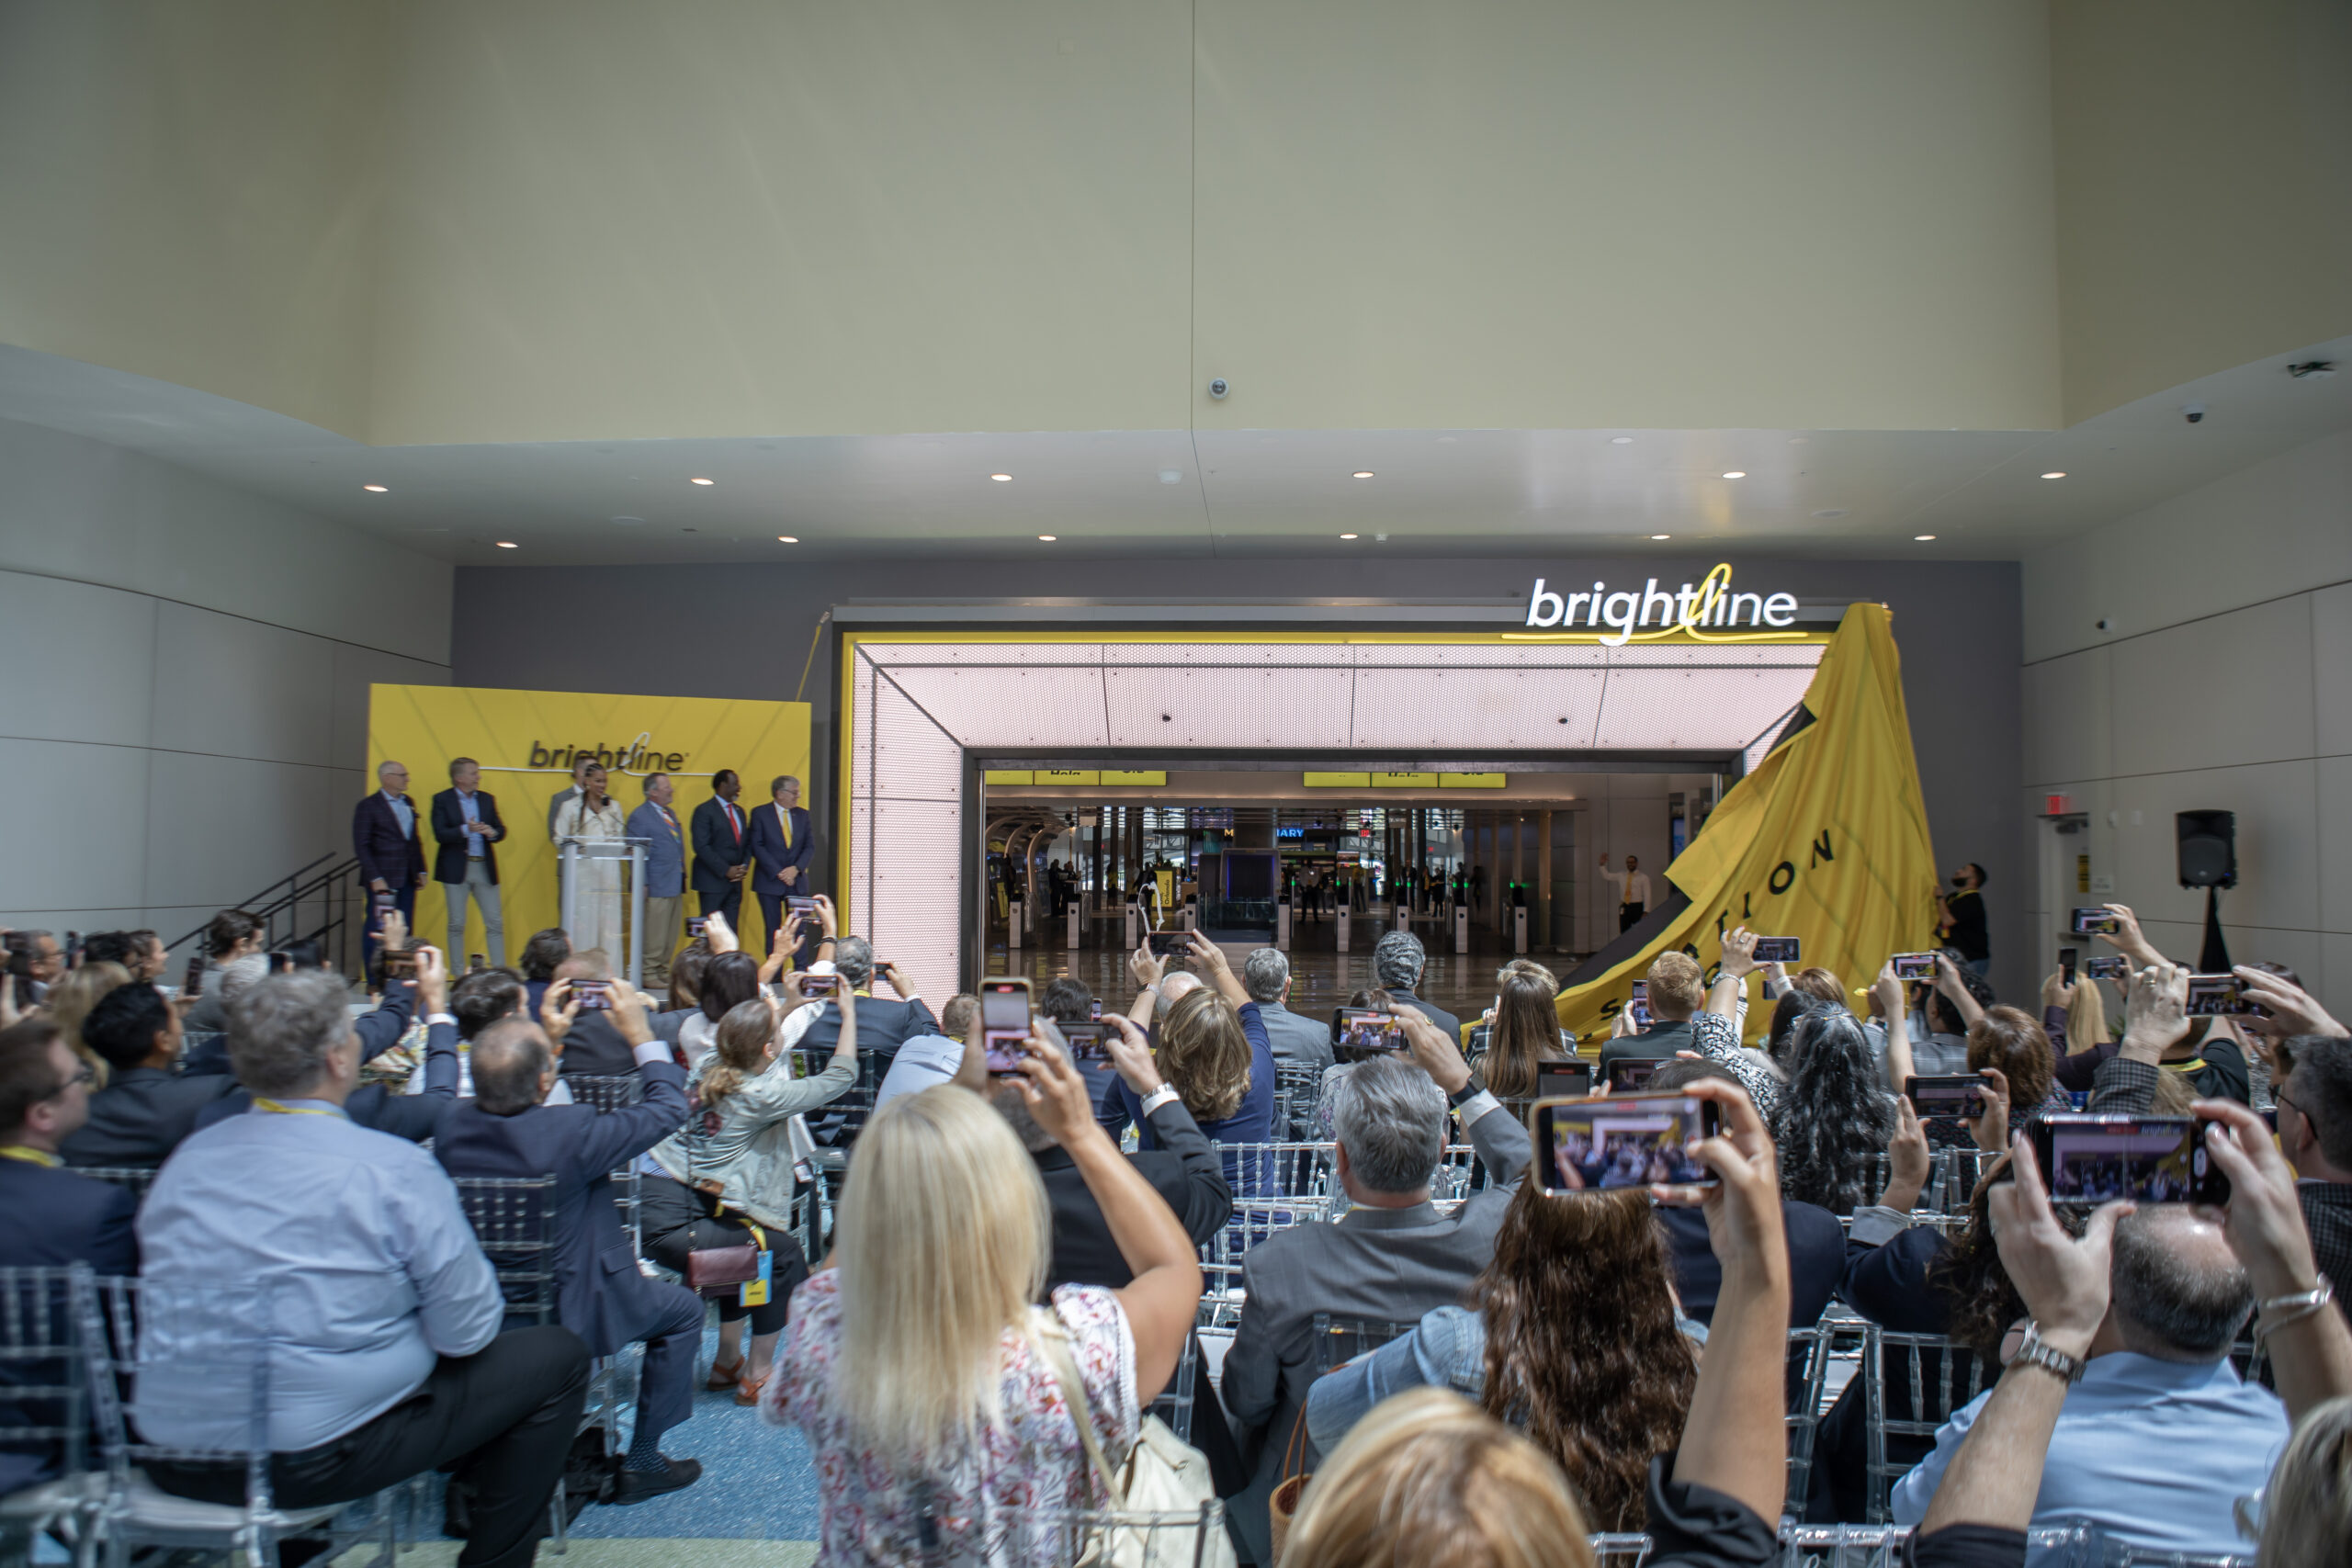 More than 300 invited guests took part in the Brightline Orlando Station reveal